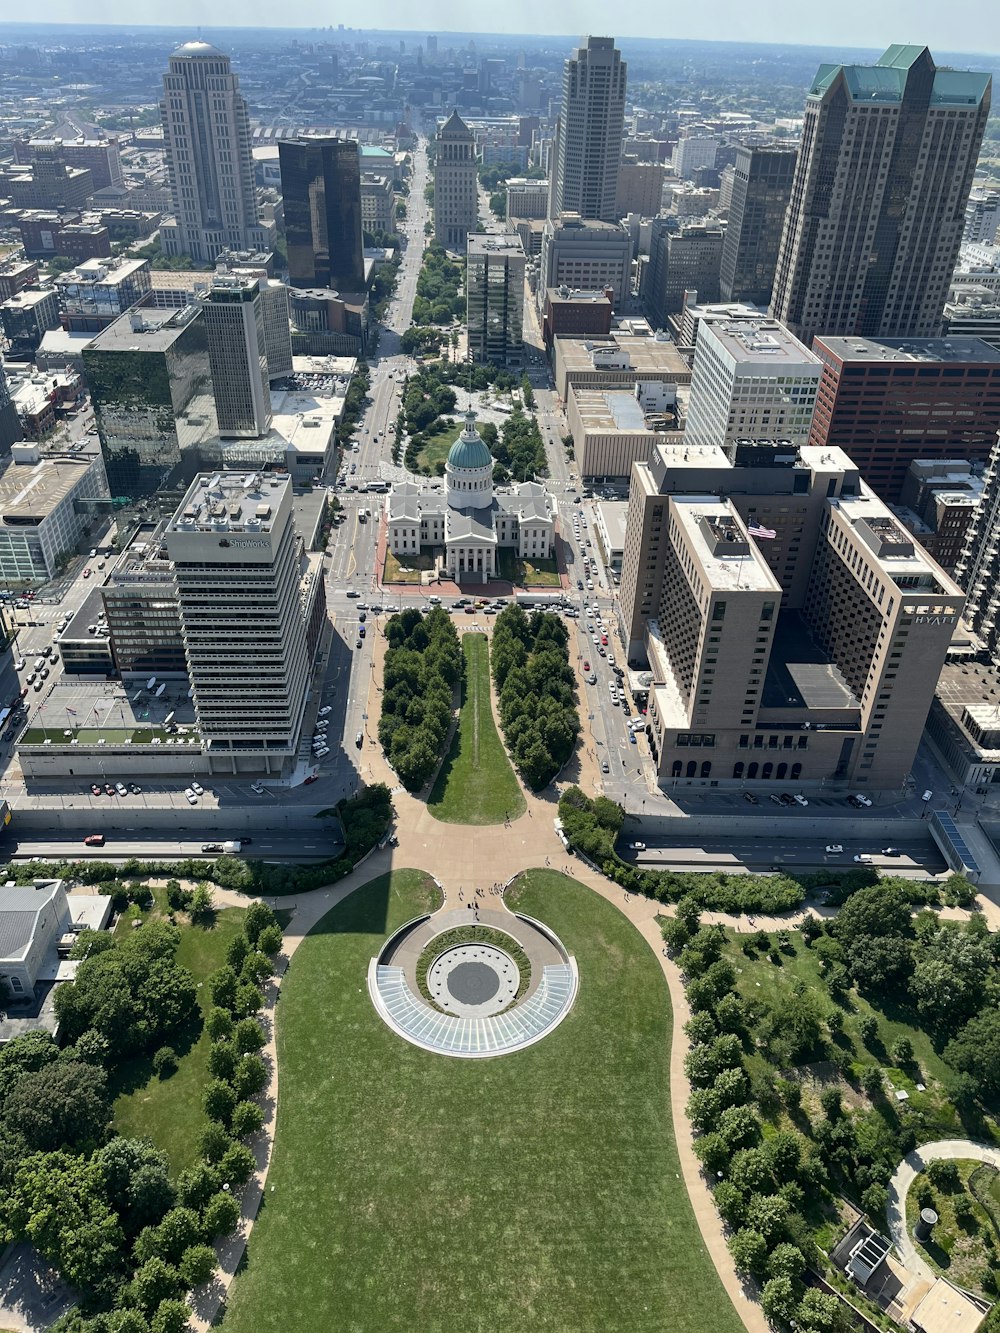 a park in a city